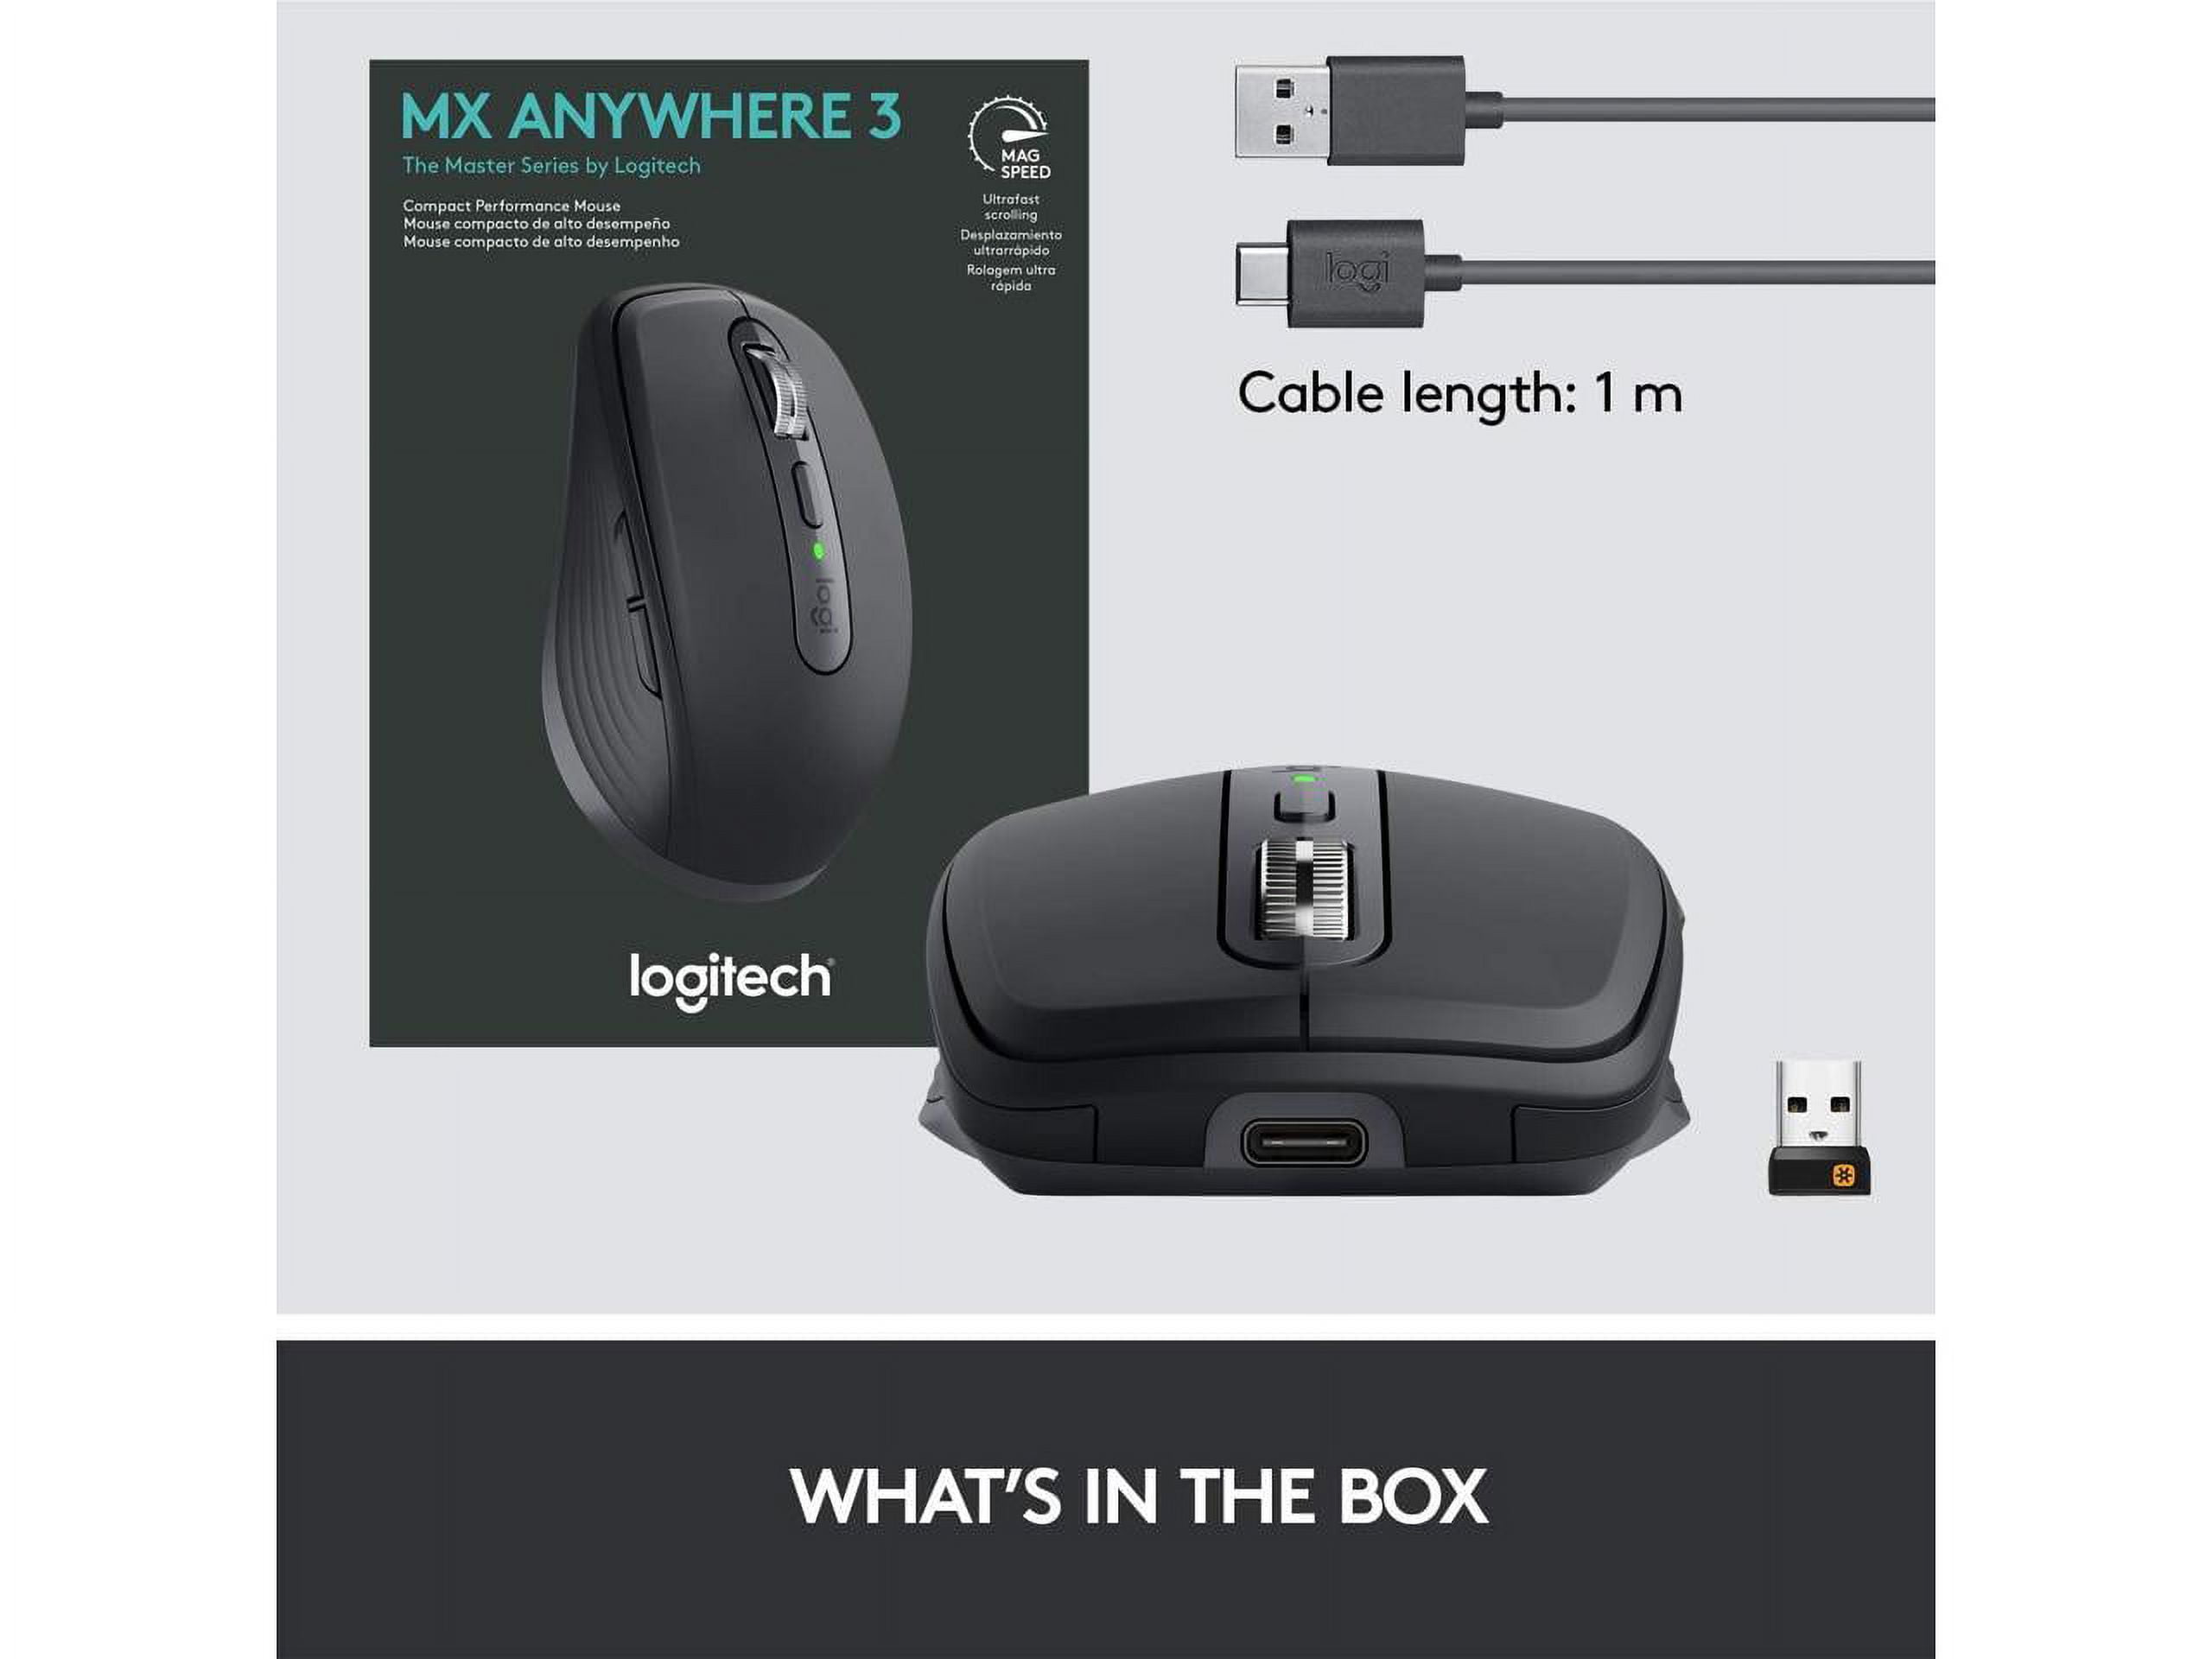  Logitech MX Anywhere 3 Compact Performance Mouse